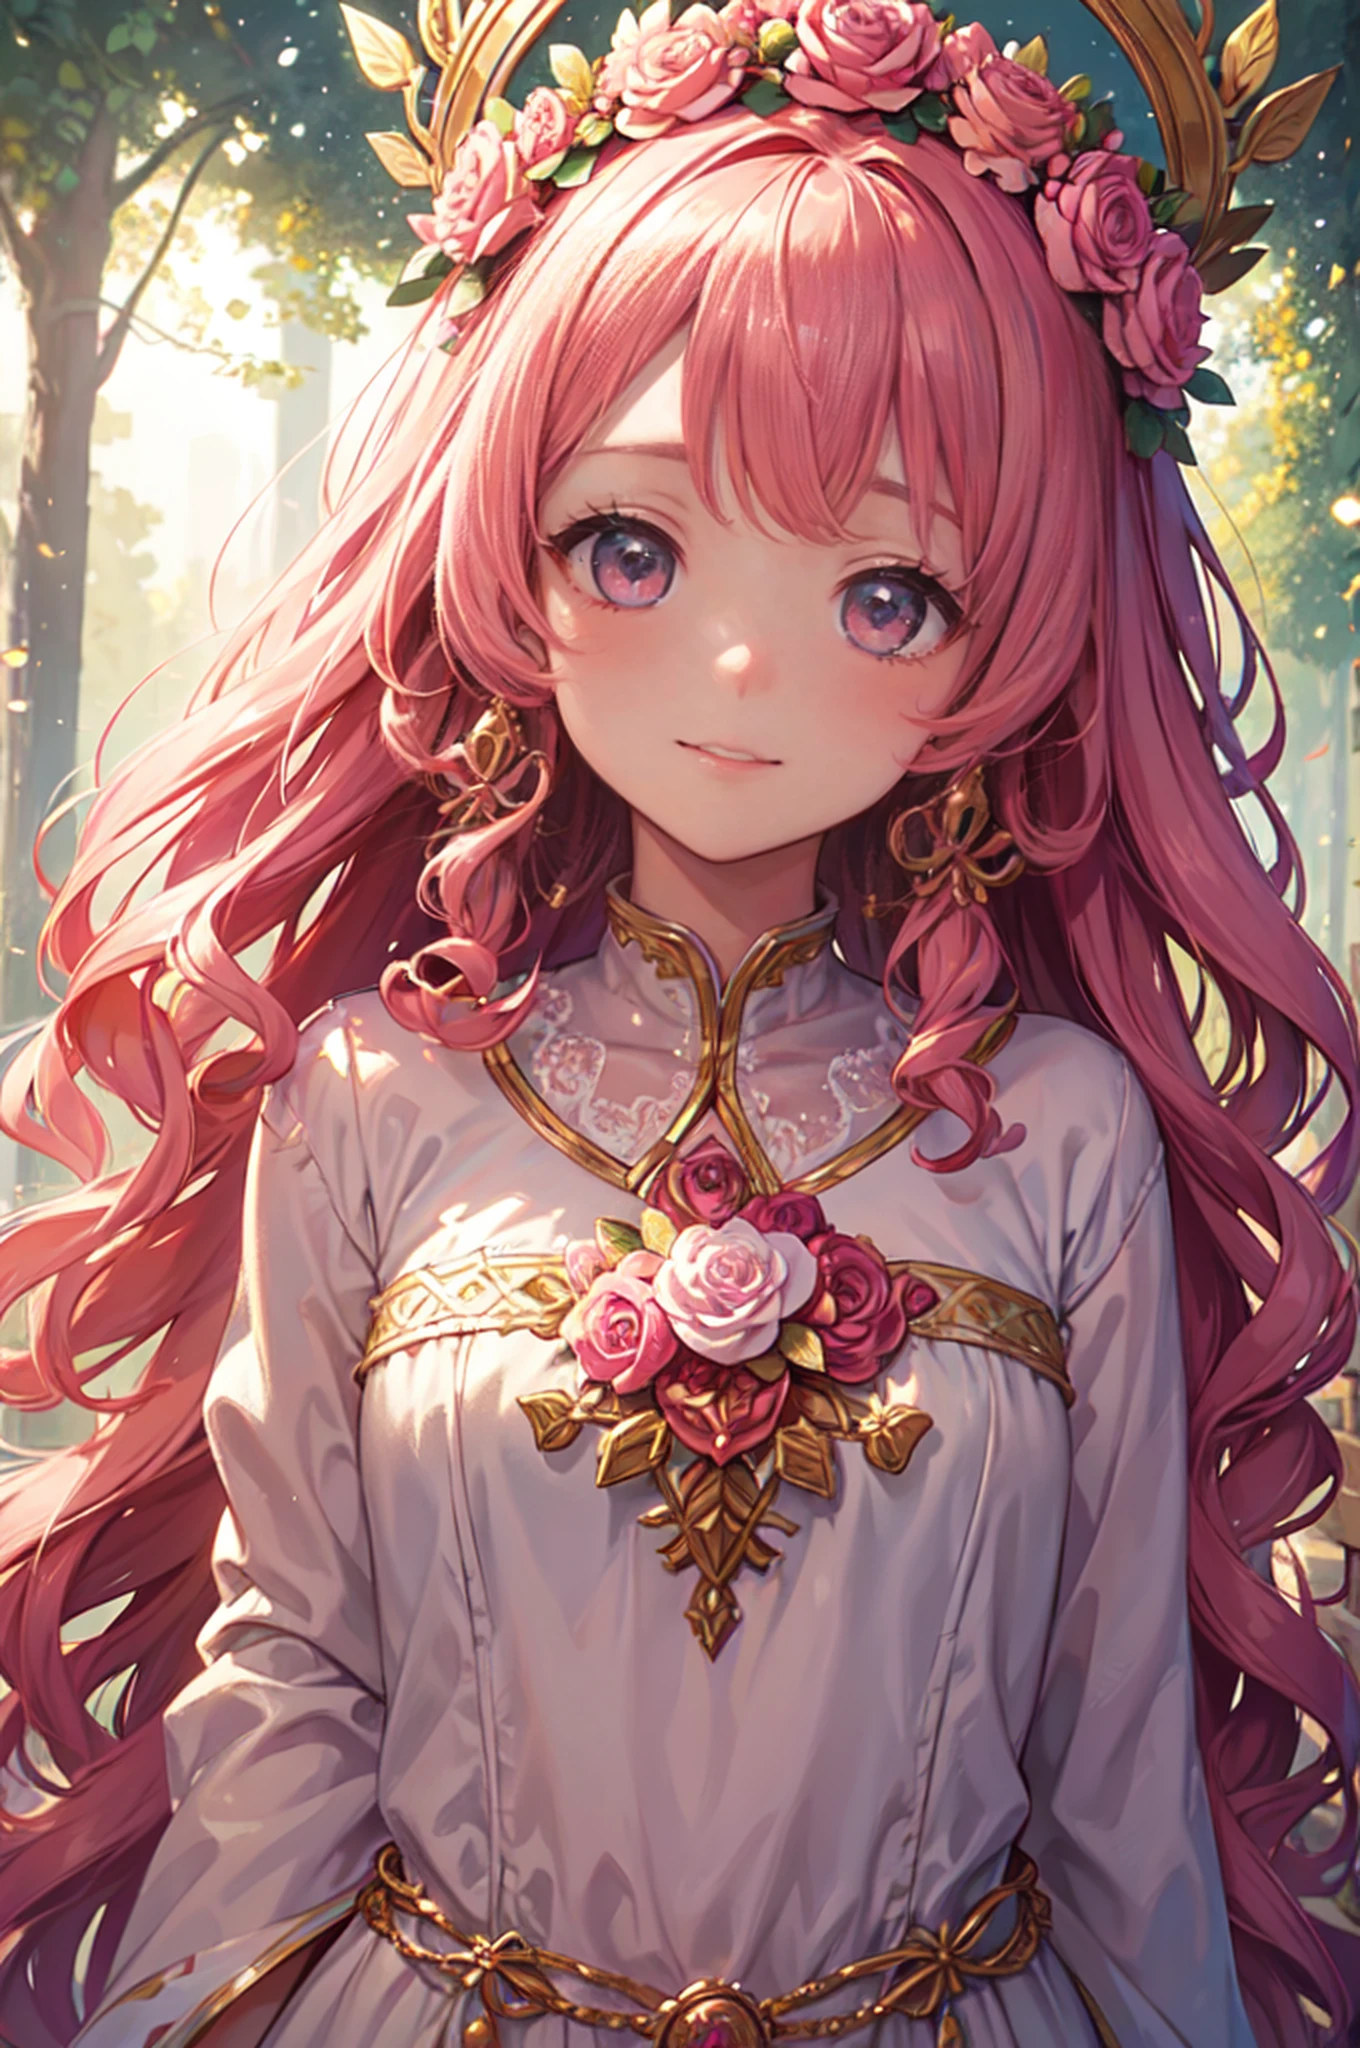 (best quality,ultra-detailed),portrait,pink color palette,soft lighting,adorable expression,innocent smile,sparkling eyes,flowing curly hair,flower crown,golden earrings,dress with lace details,fair skin complexion,rosy cheeks,shy pose,enchanted forest background